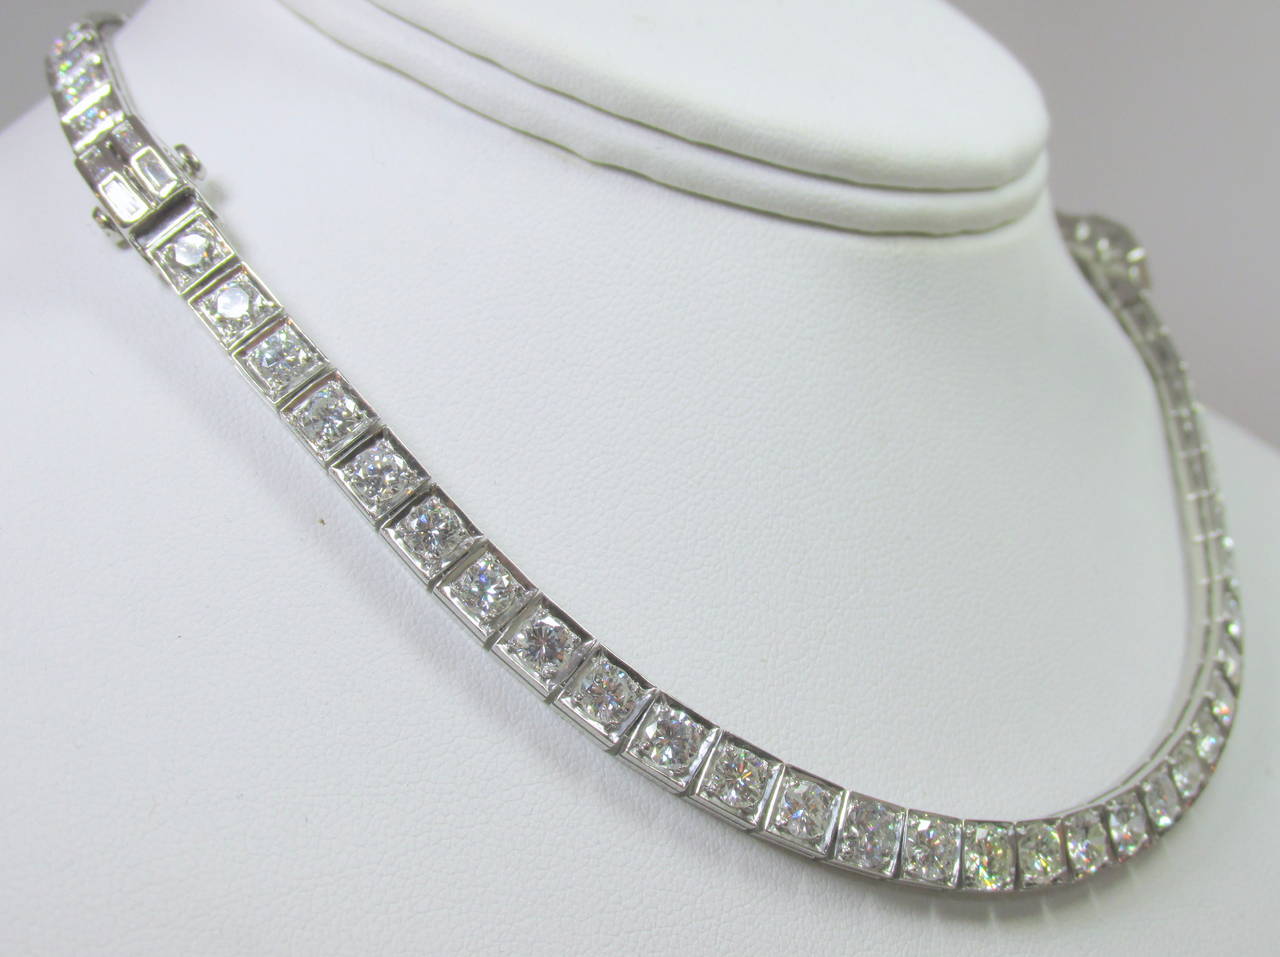 Platinum and diamond necklace with added piece to make longer in back.  Separates into two bracelets.  Diamonds are approximately near colorless (I)  and SI (slightly included) in clarity.  There are 72 rounds and 8 baguette cut diamonds.  The total